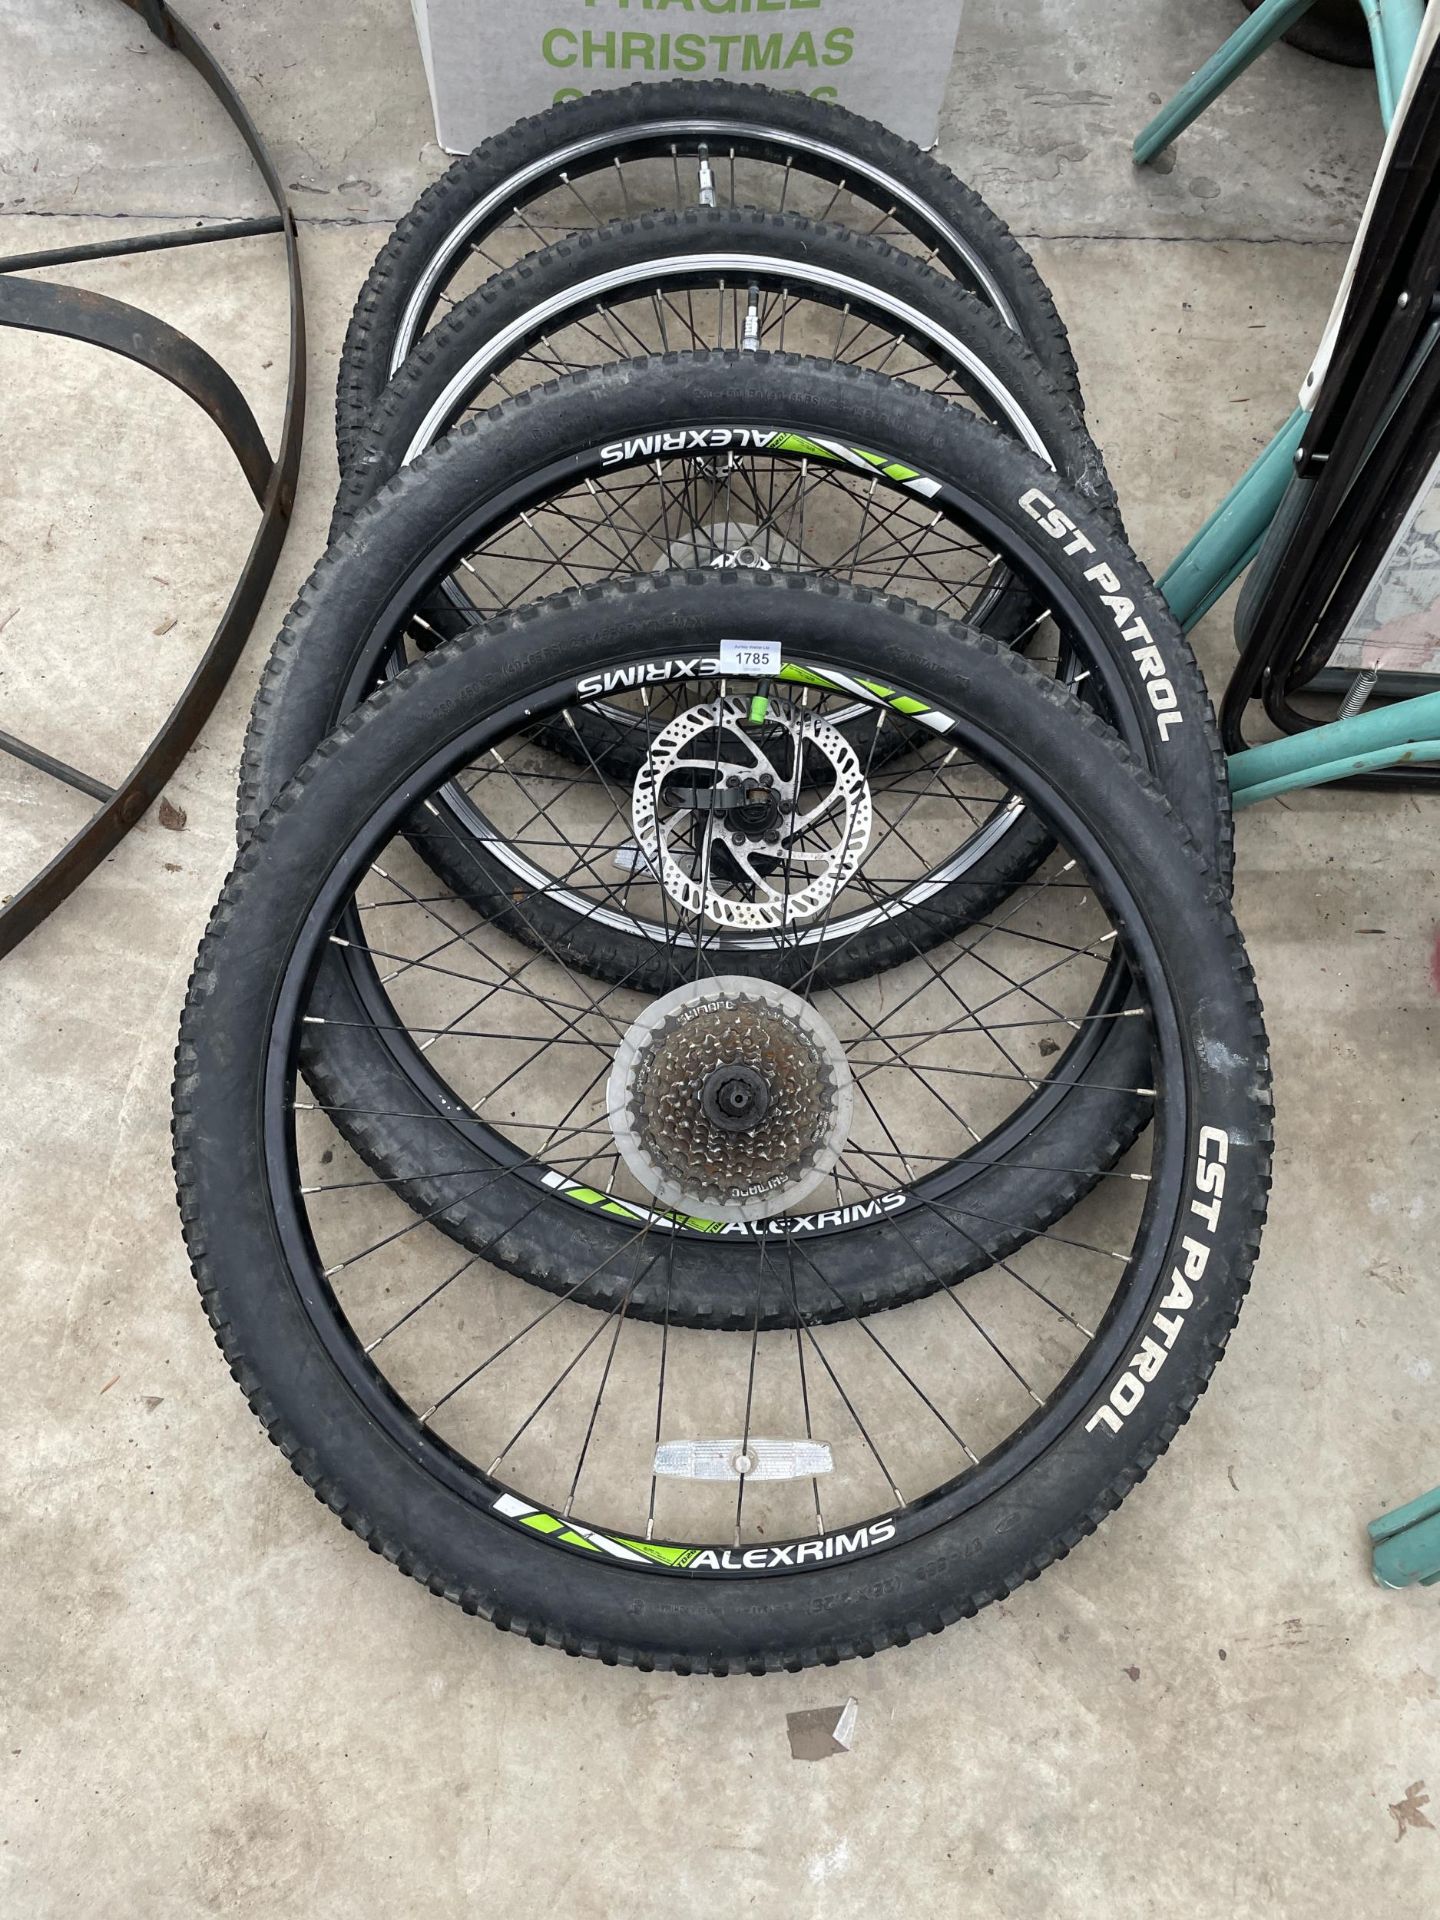 TWO PAIRS OF MOUNTAIN BIKE WHEELS WITH DISC BRAKES